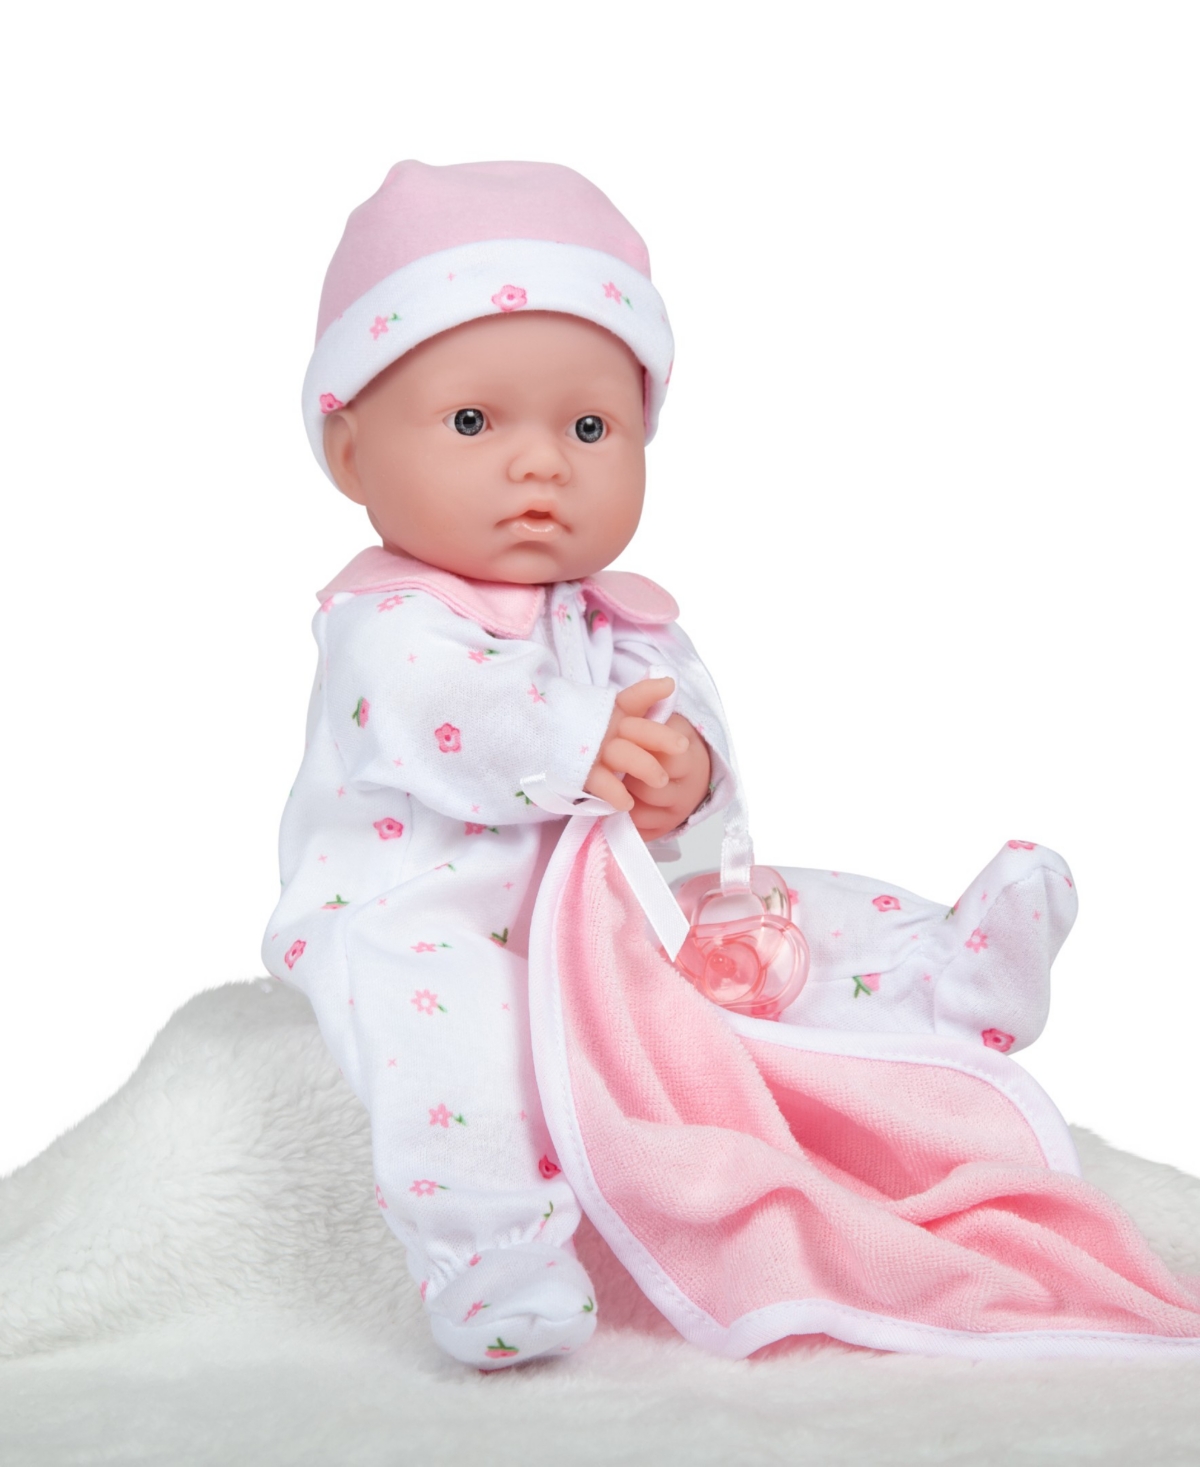 Shop Jc Toys La Baby Caucasian 11" Soft Body Baby Doll Pink Outfit